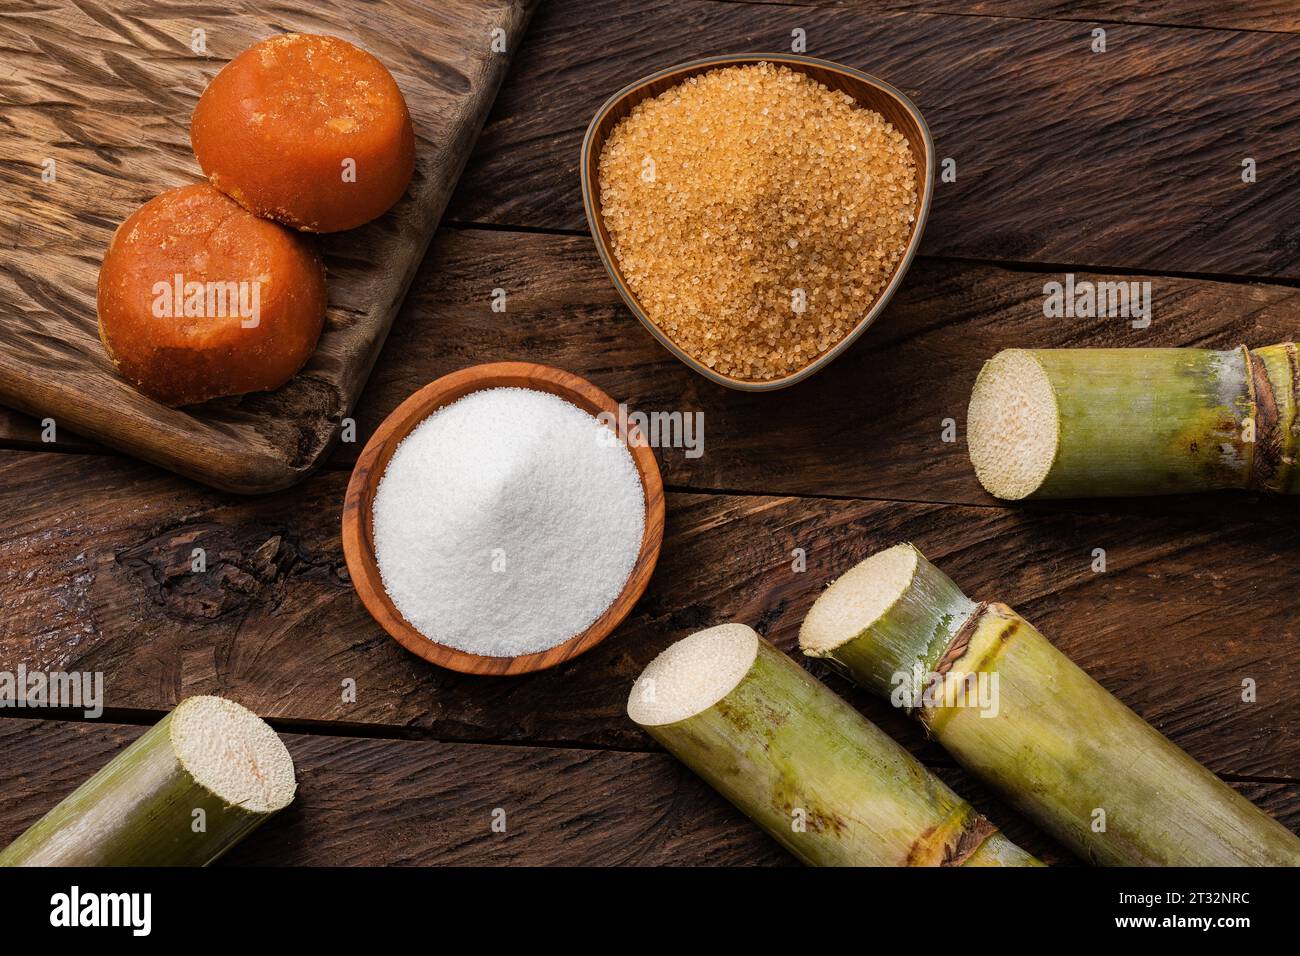 Saccharum officinarum - Panela, brown and white sugar with the stems of sugar cane Stock Photo